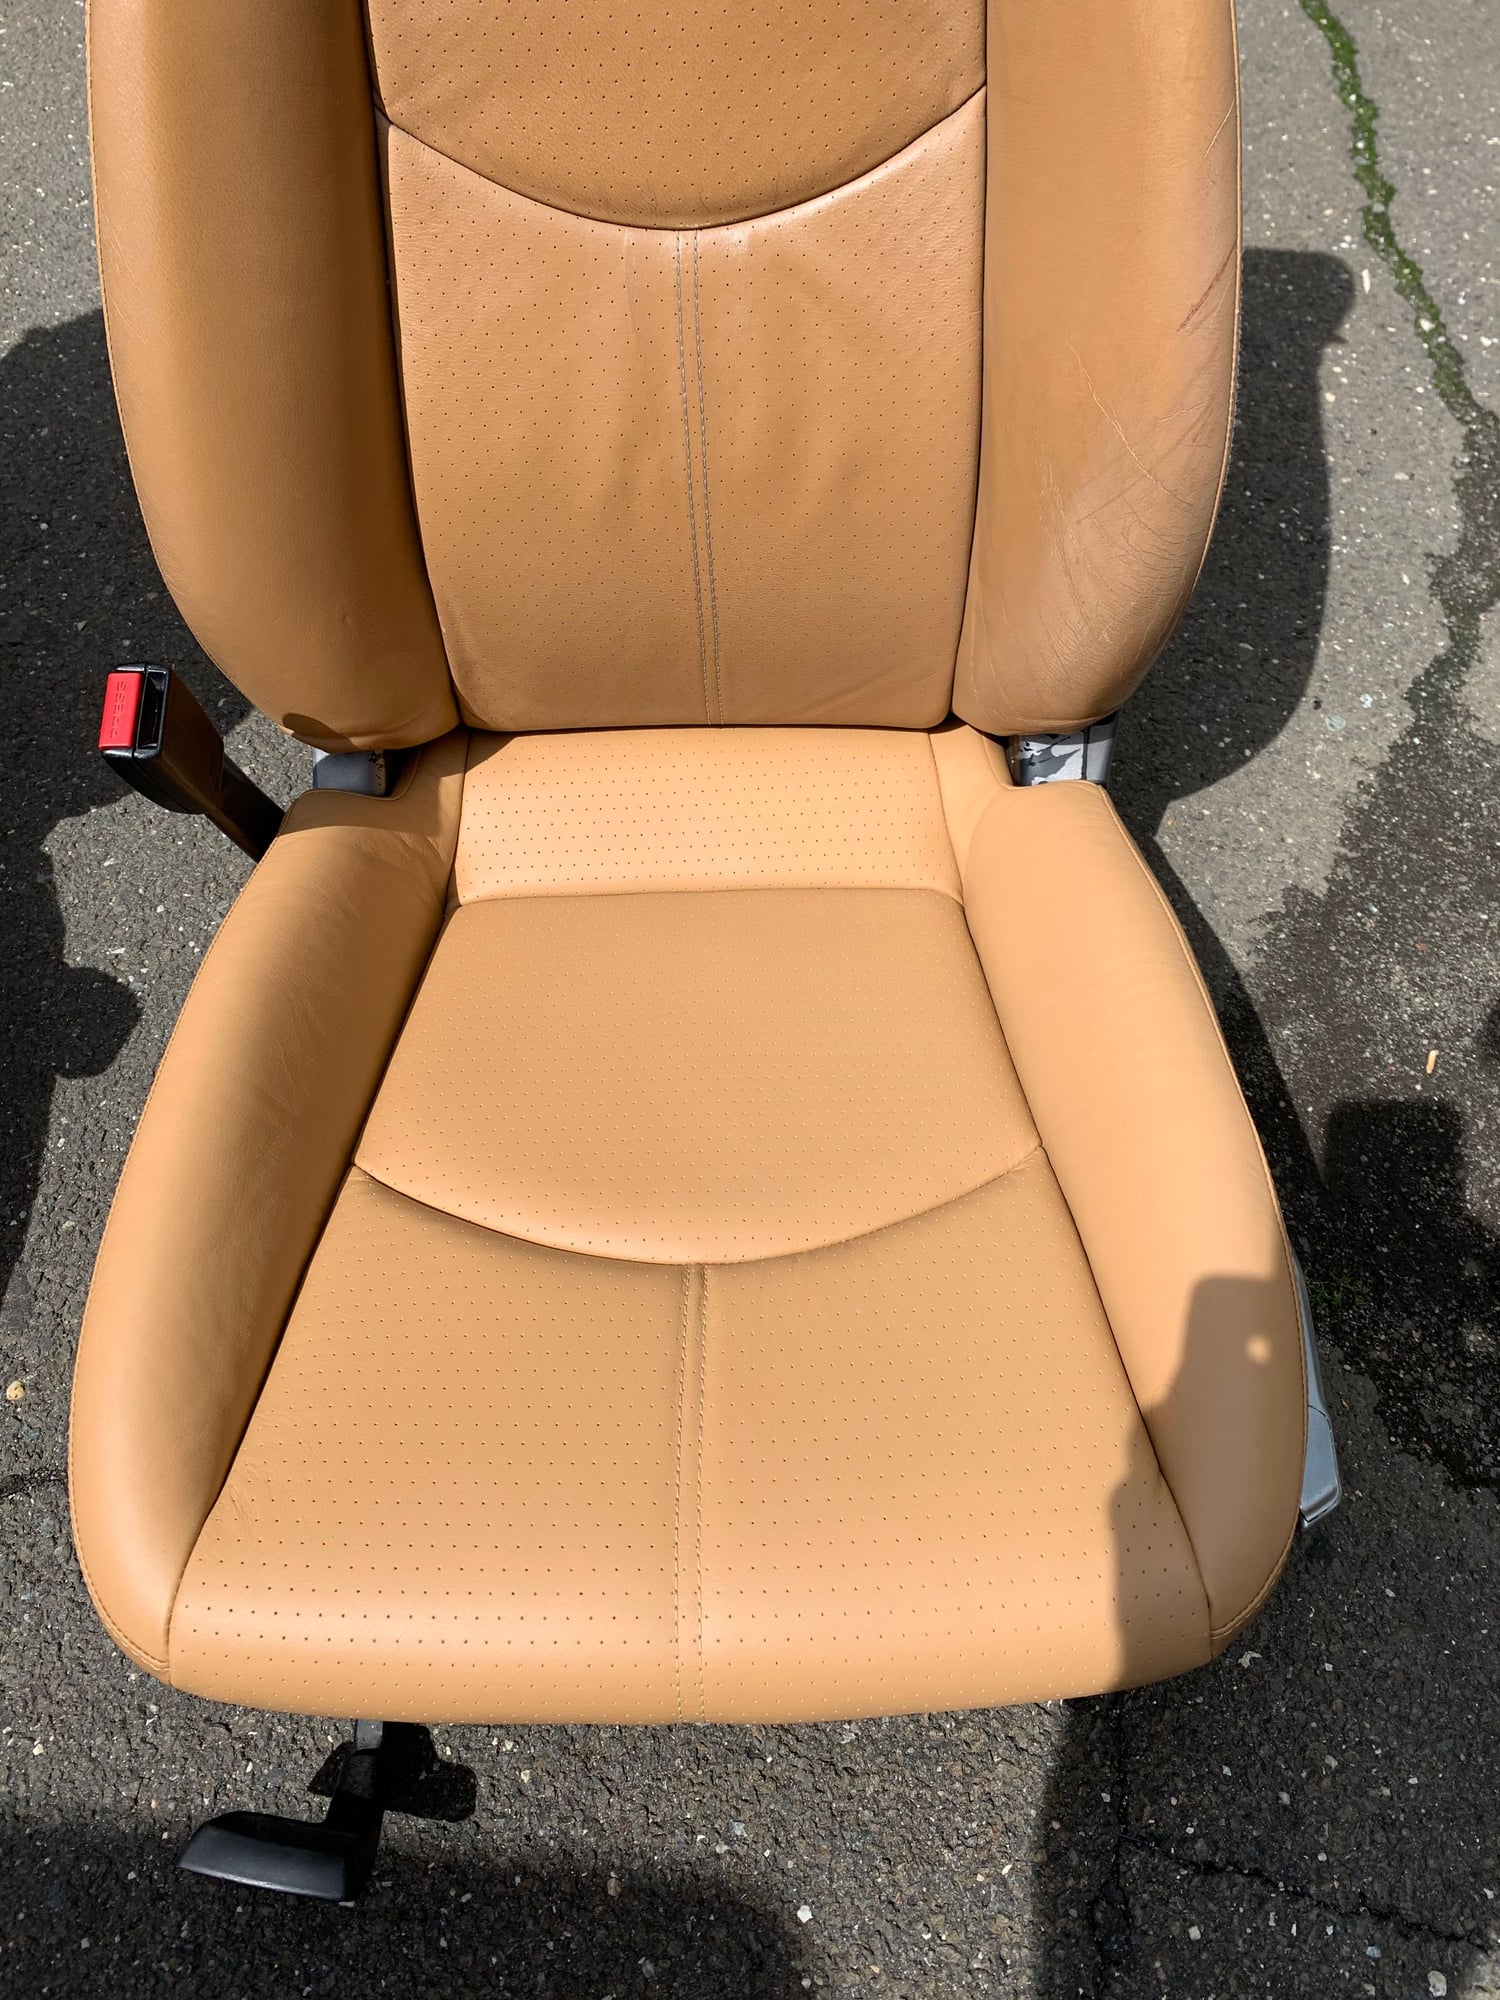 Interior/Upholstery - Porsche 997/987 Seats in Cashmere Beige (Tan) - fits 997, 911, 996, 993, 964, 911 - Used - Greenwich, CT 06807, United States